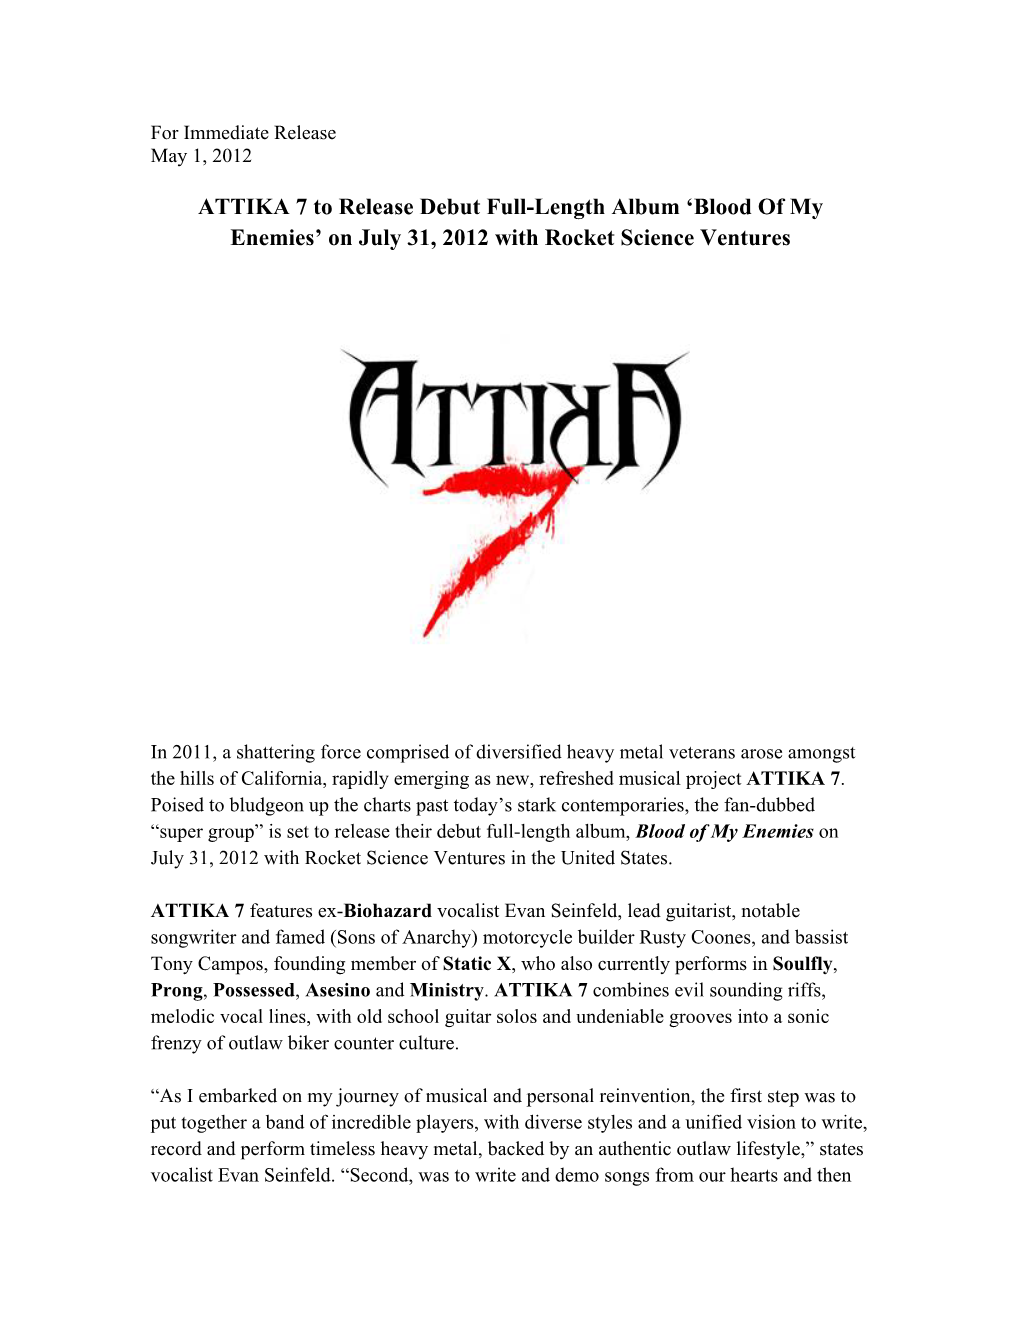 ATTIKA 7 to Release Debut Full-Length Album ‘Blood of My Enemies’ on July 31, 2012 with Rocket Science Ventures